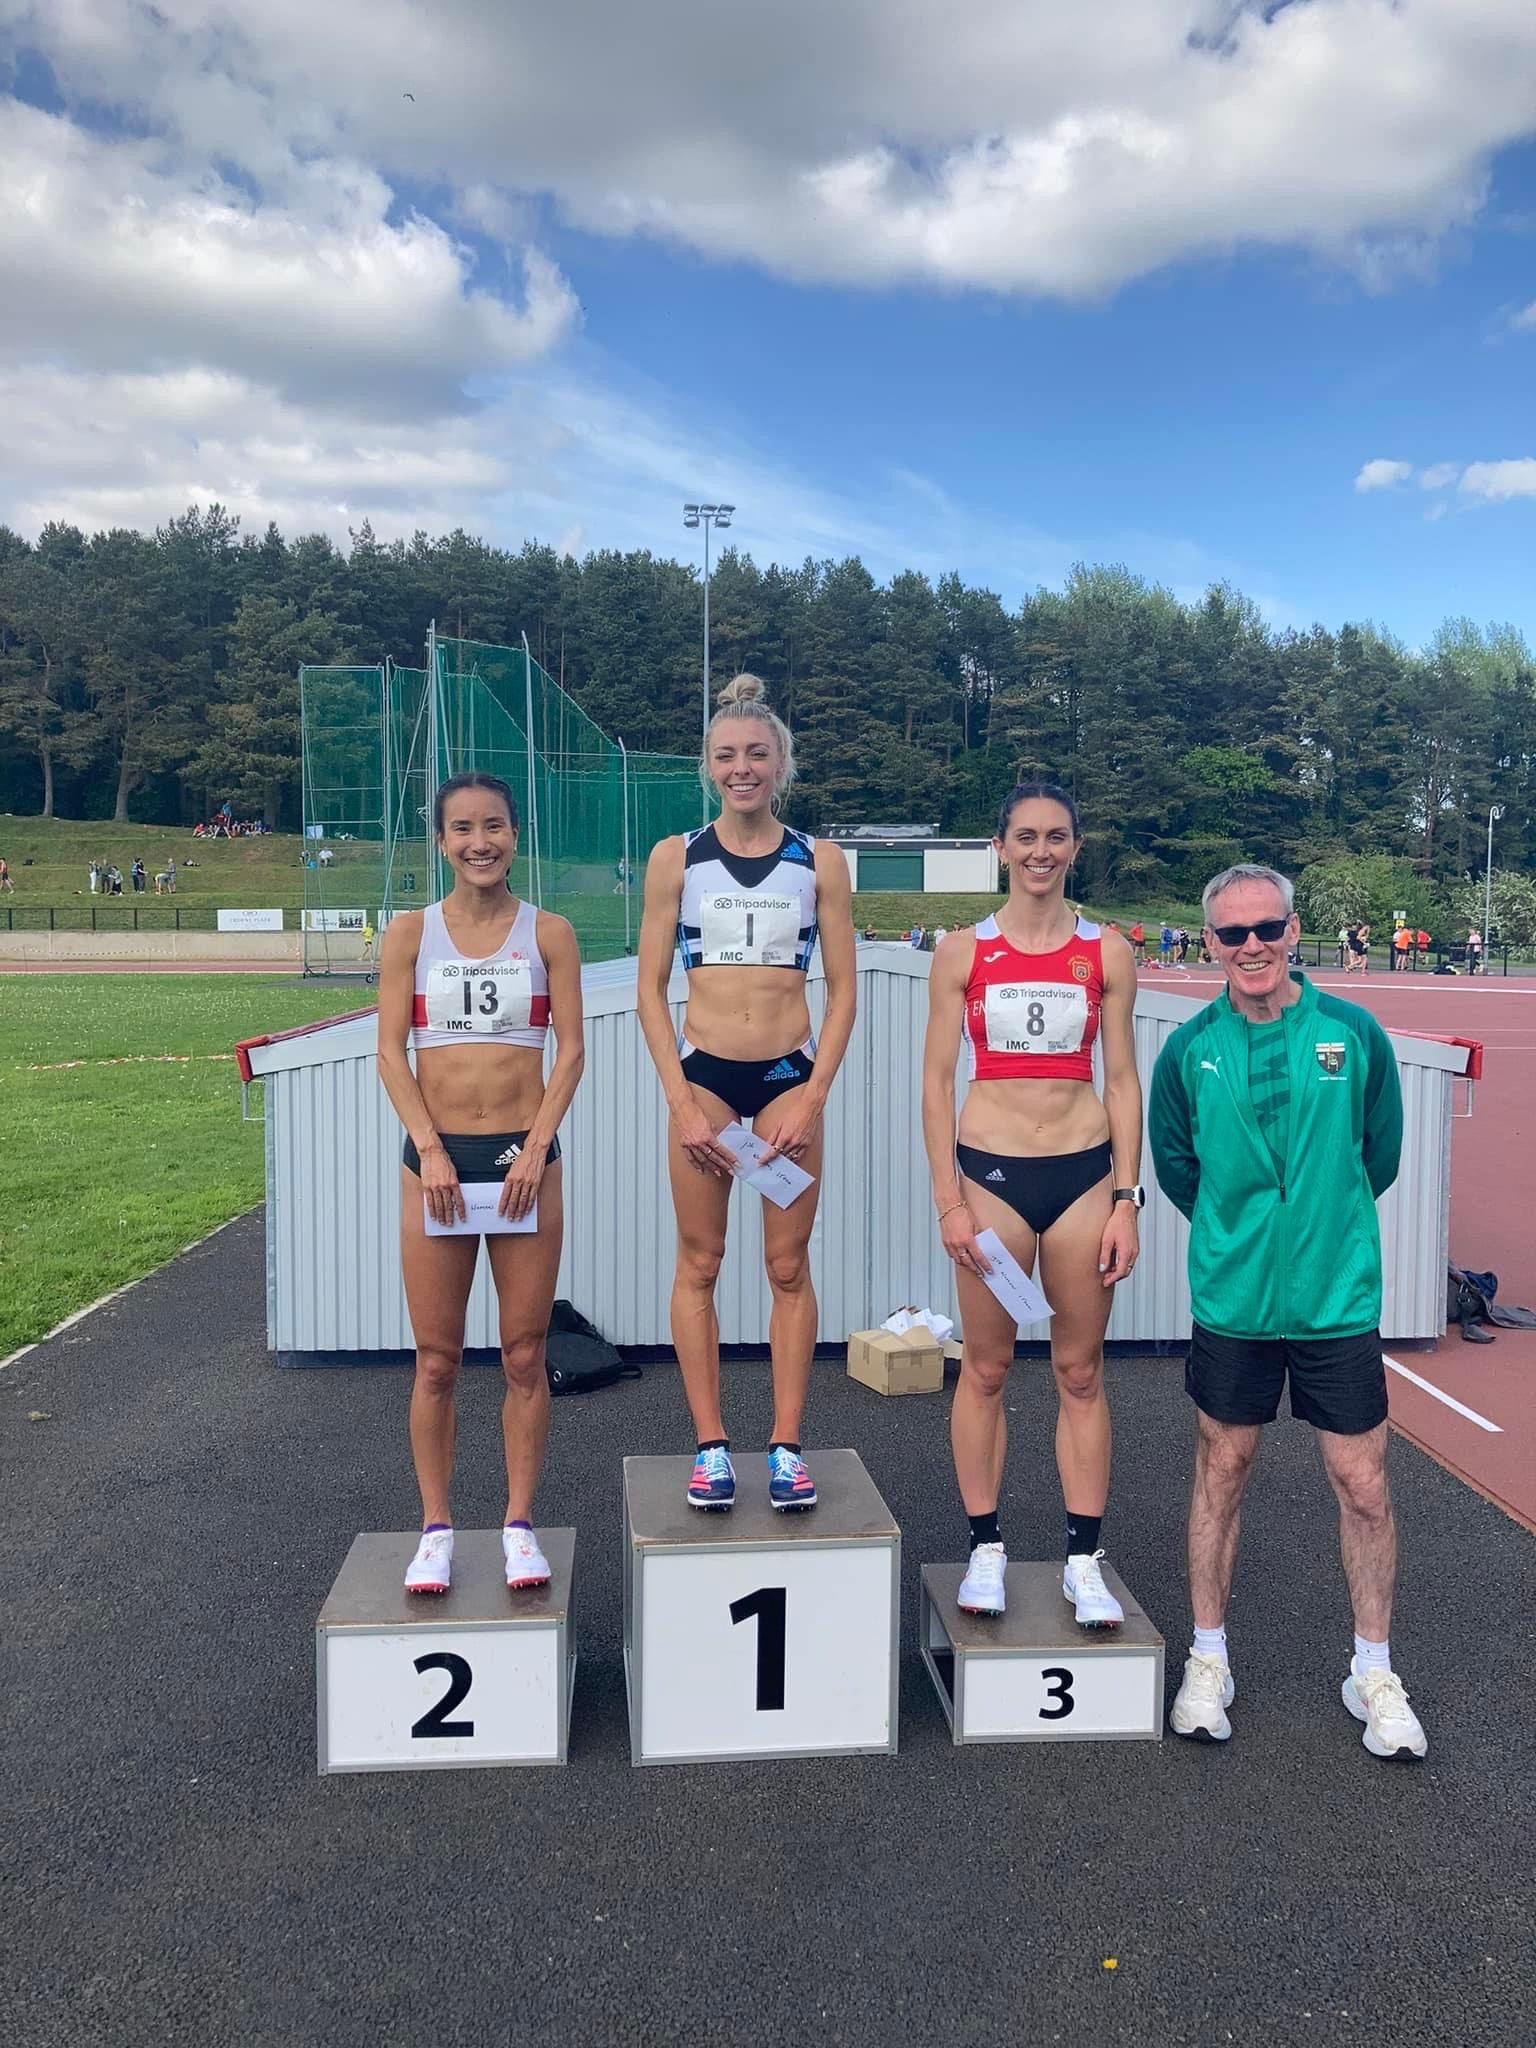 Cathal McLaughlin from Derry Track Club presenting podium prizes to the women’s international 1500m at the 2022 Belfast Irish Milers Meet in association with Tripadvisor. Olympian Alex Bell from Great Britain topped the podium